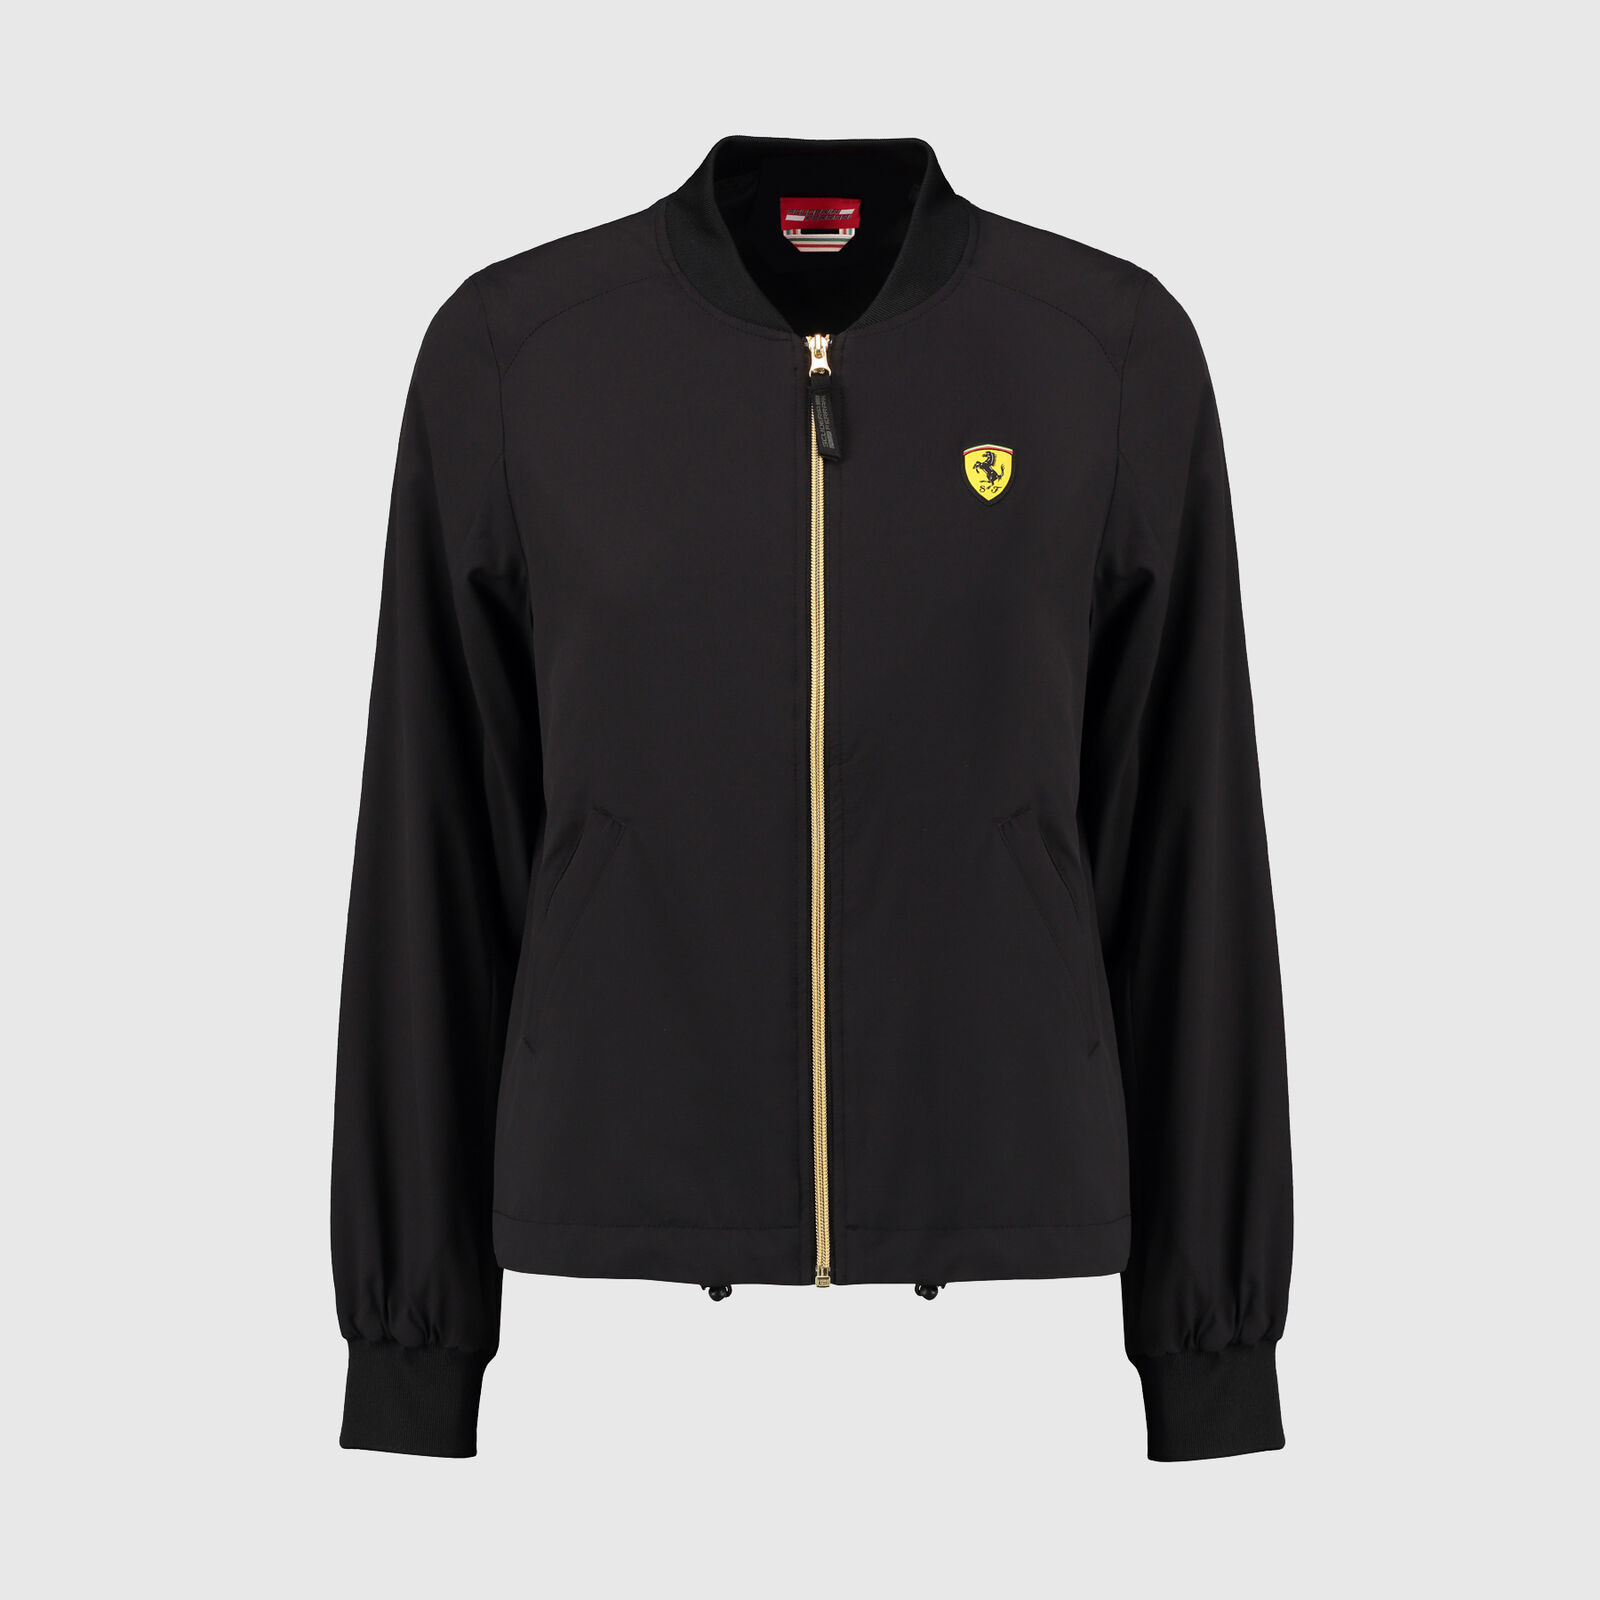 F collection Ferrari jacket automatic! - clothing & accessories